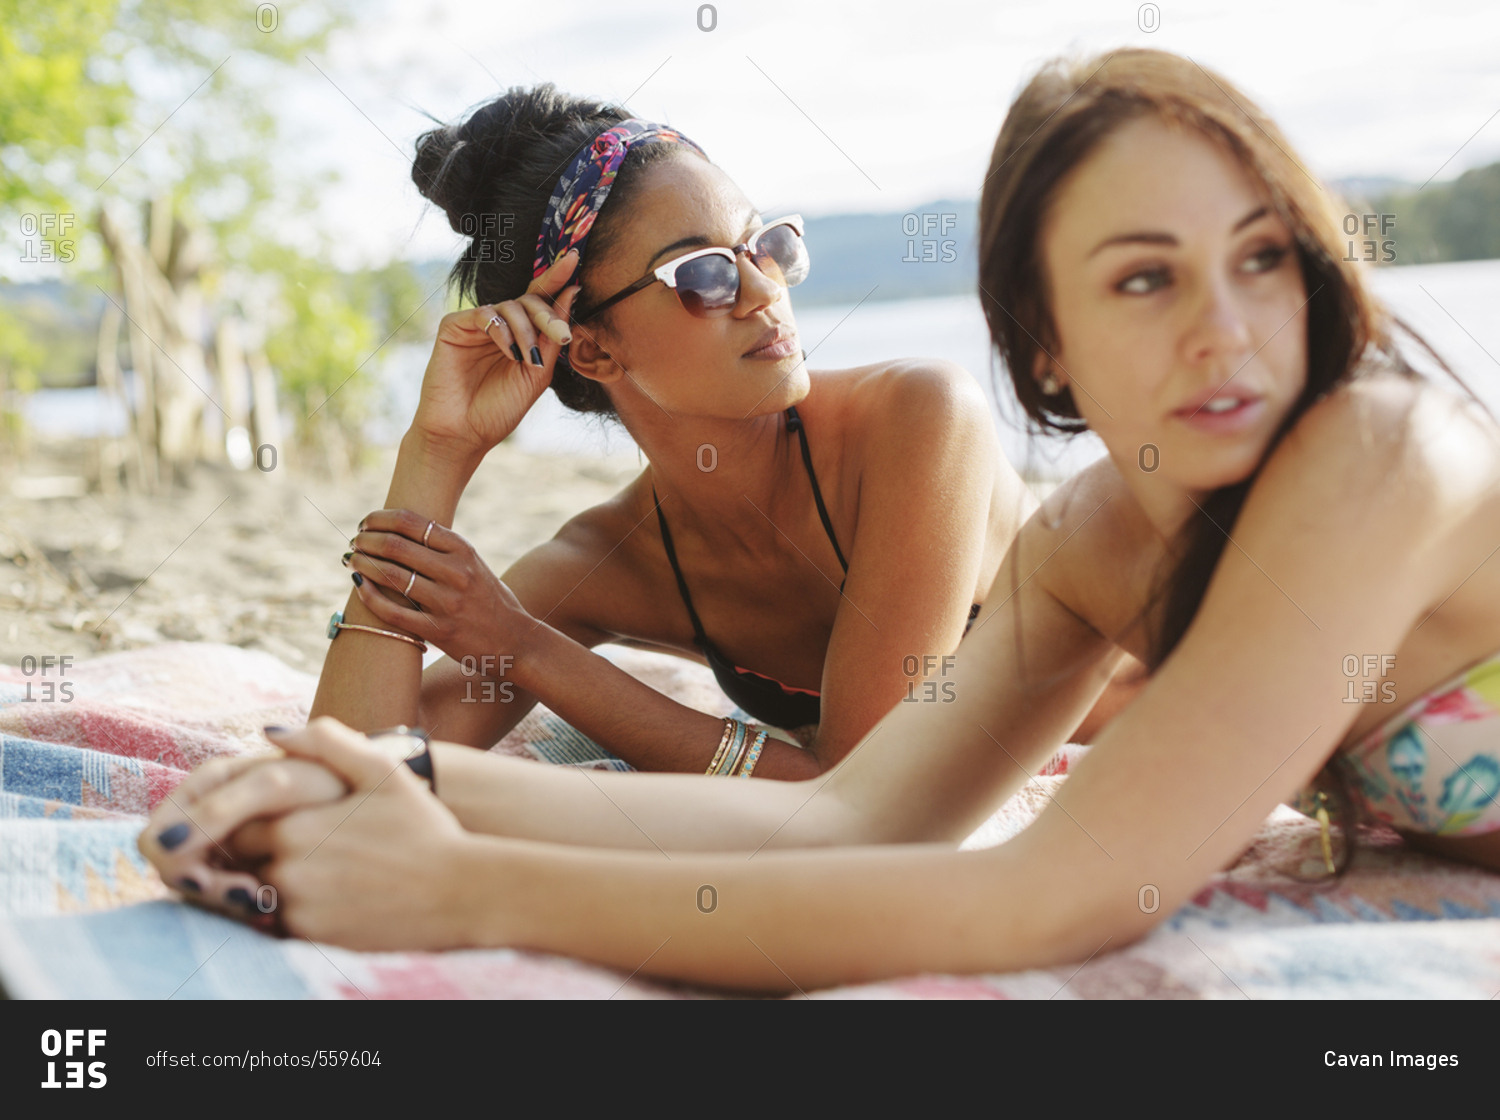 Rear view of female friends sitting on picnic blanket at riverbank